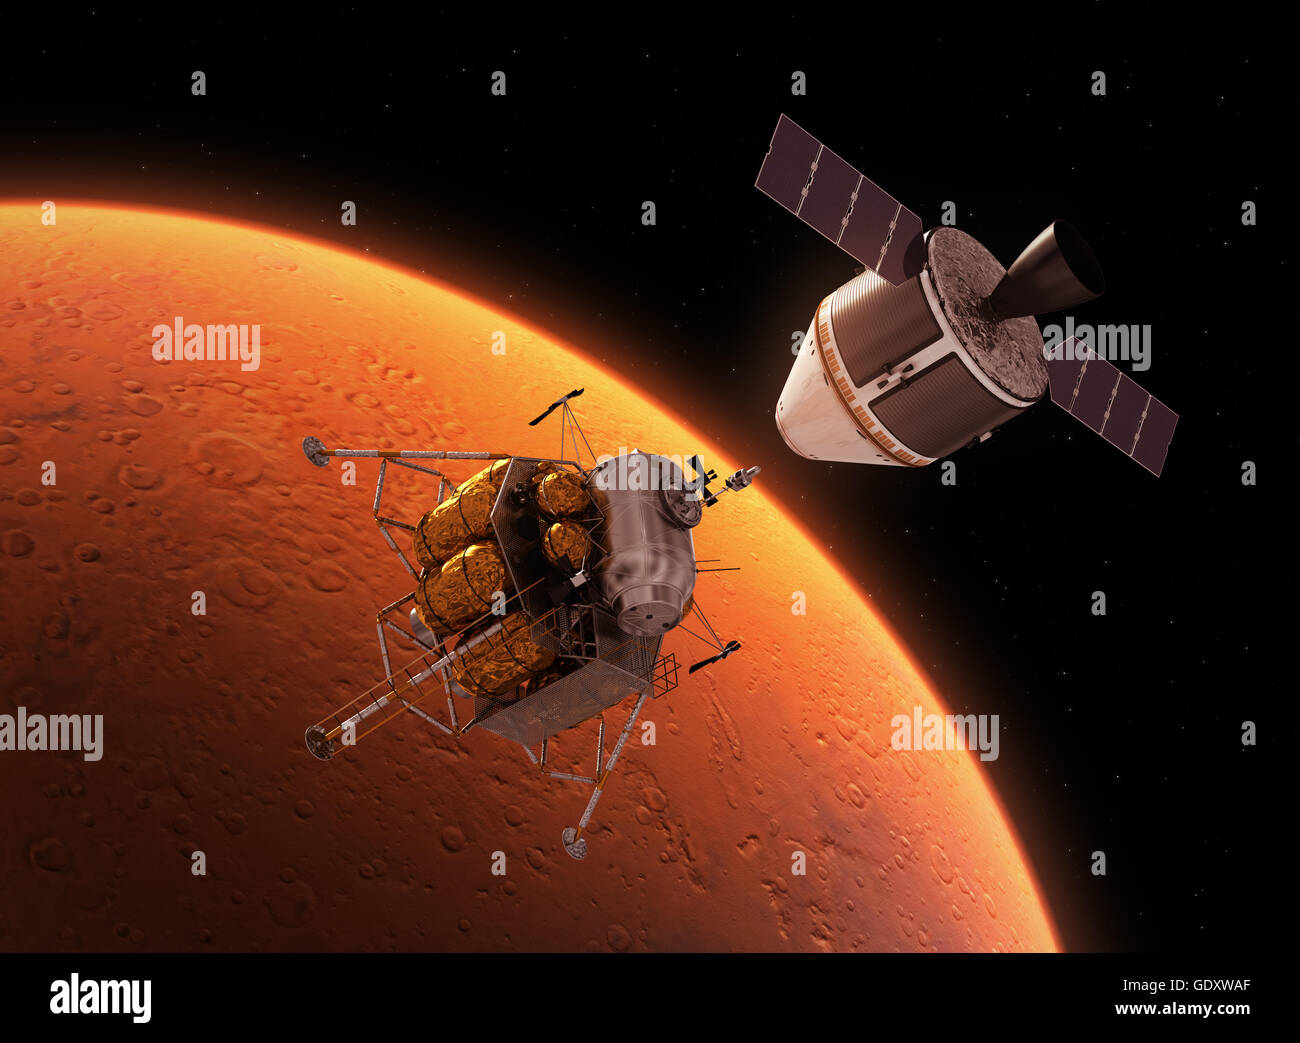 Interplanetary Space Station Orbiting Red Planet Stock Photo